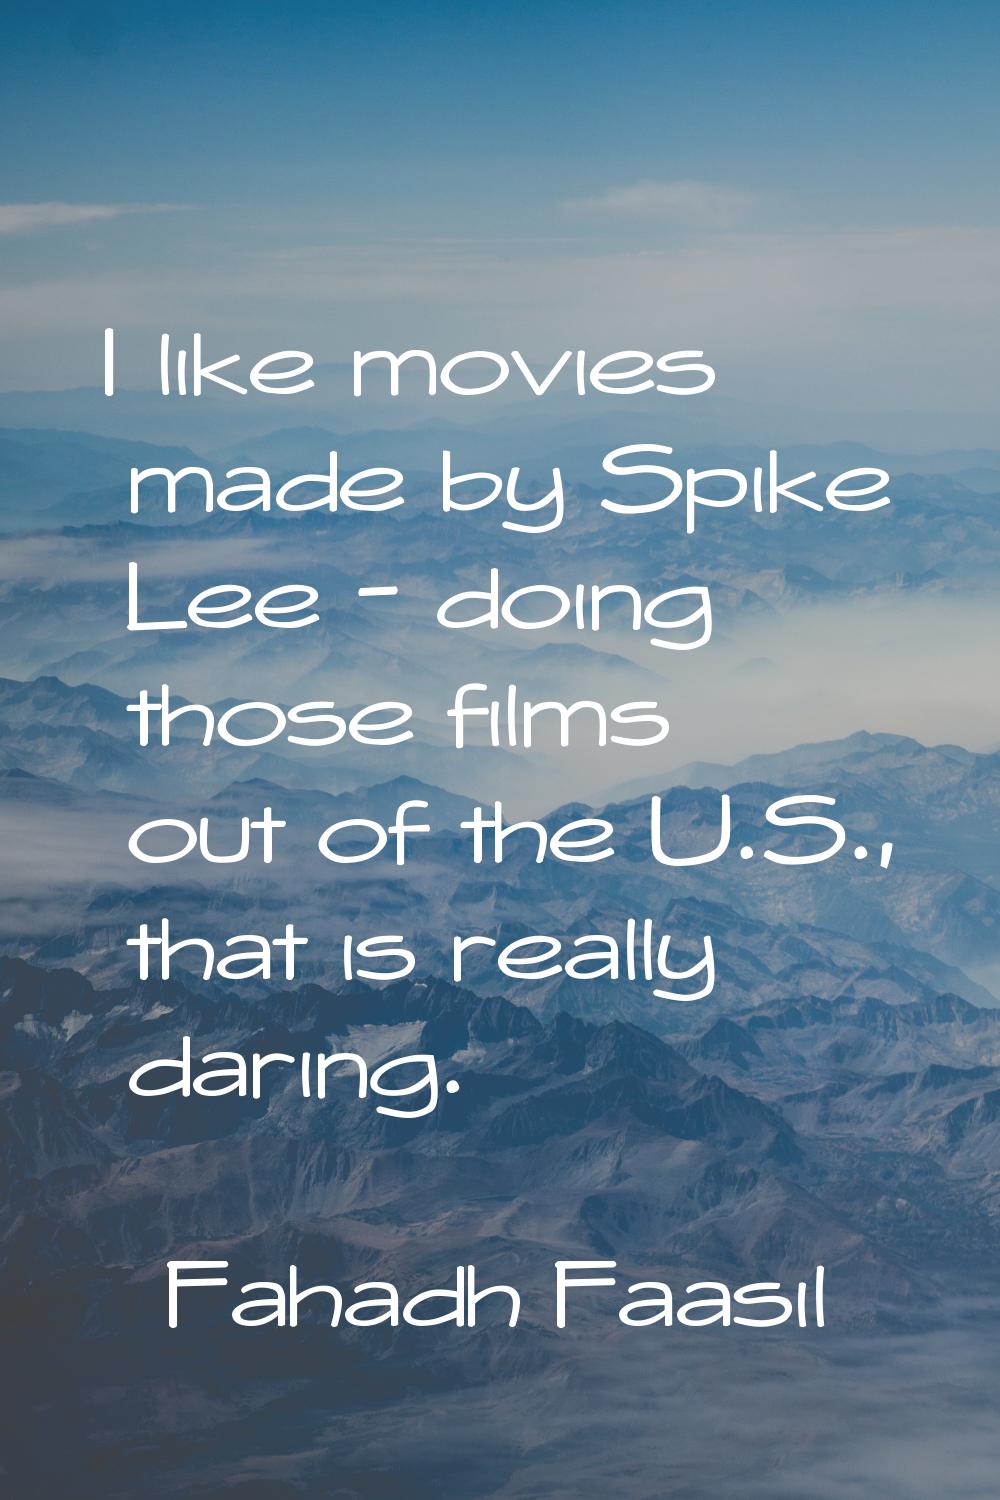 I like movies made by Spike Lee - doing those films out of the U.S., that is really daring.